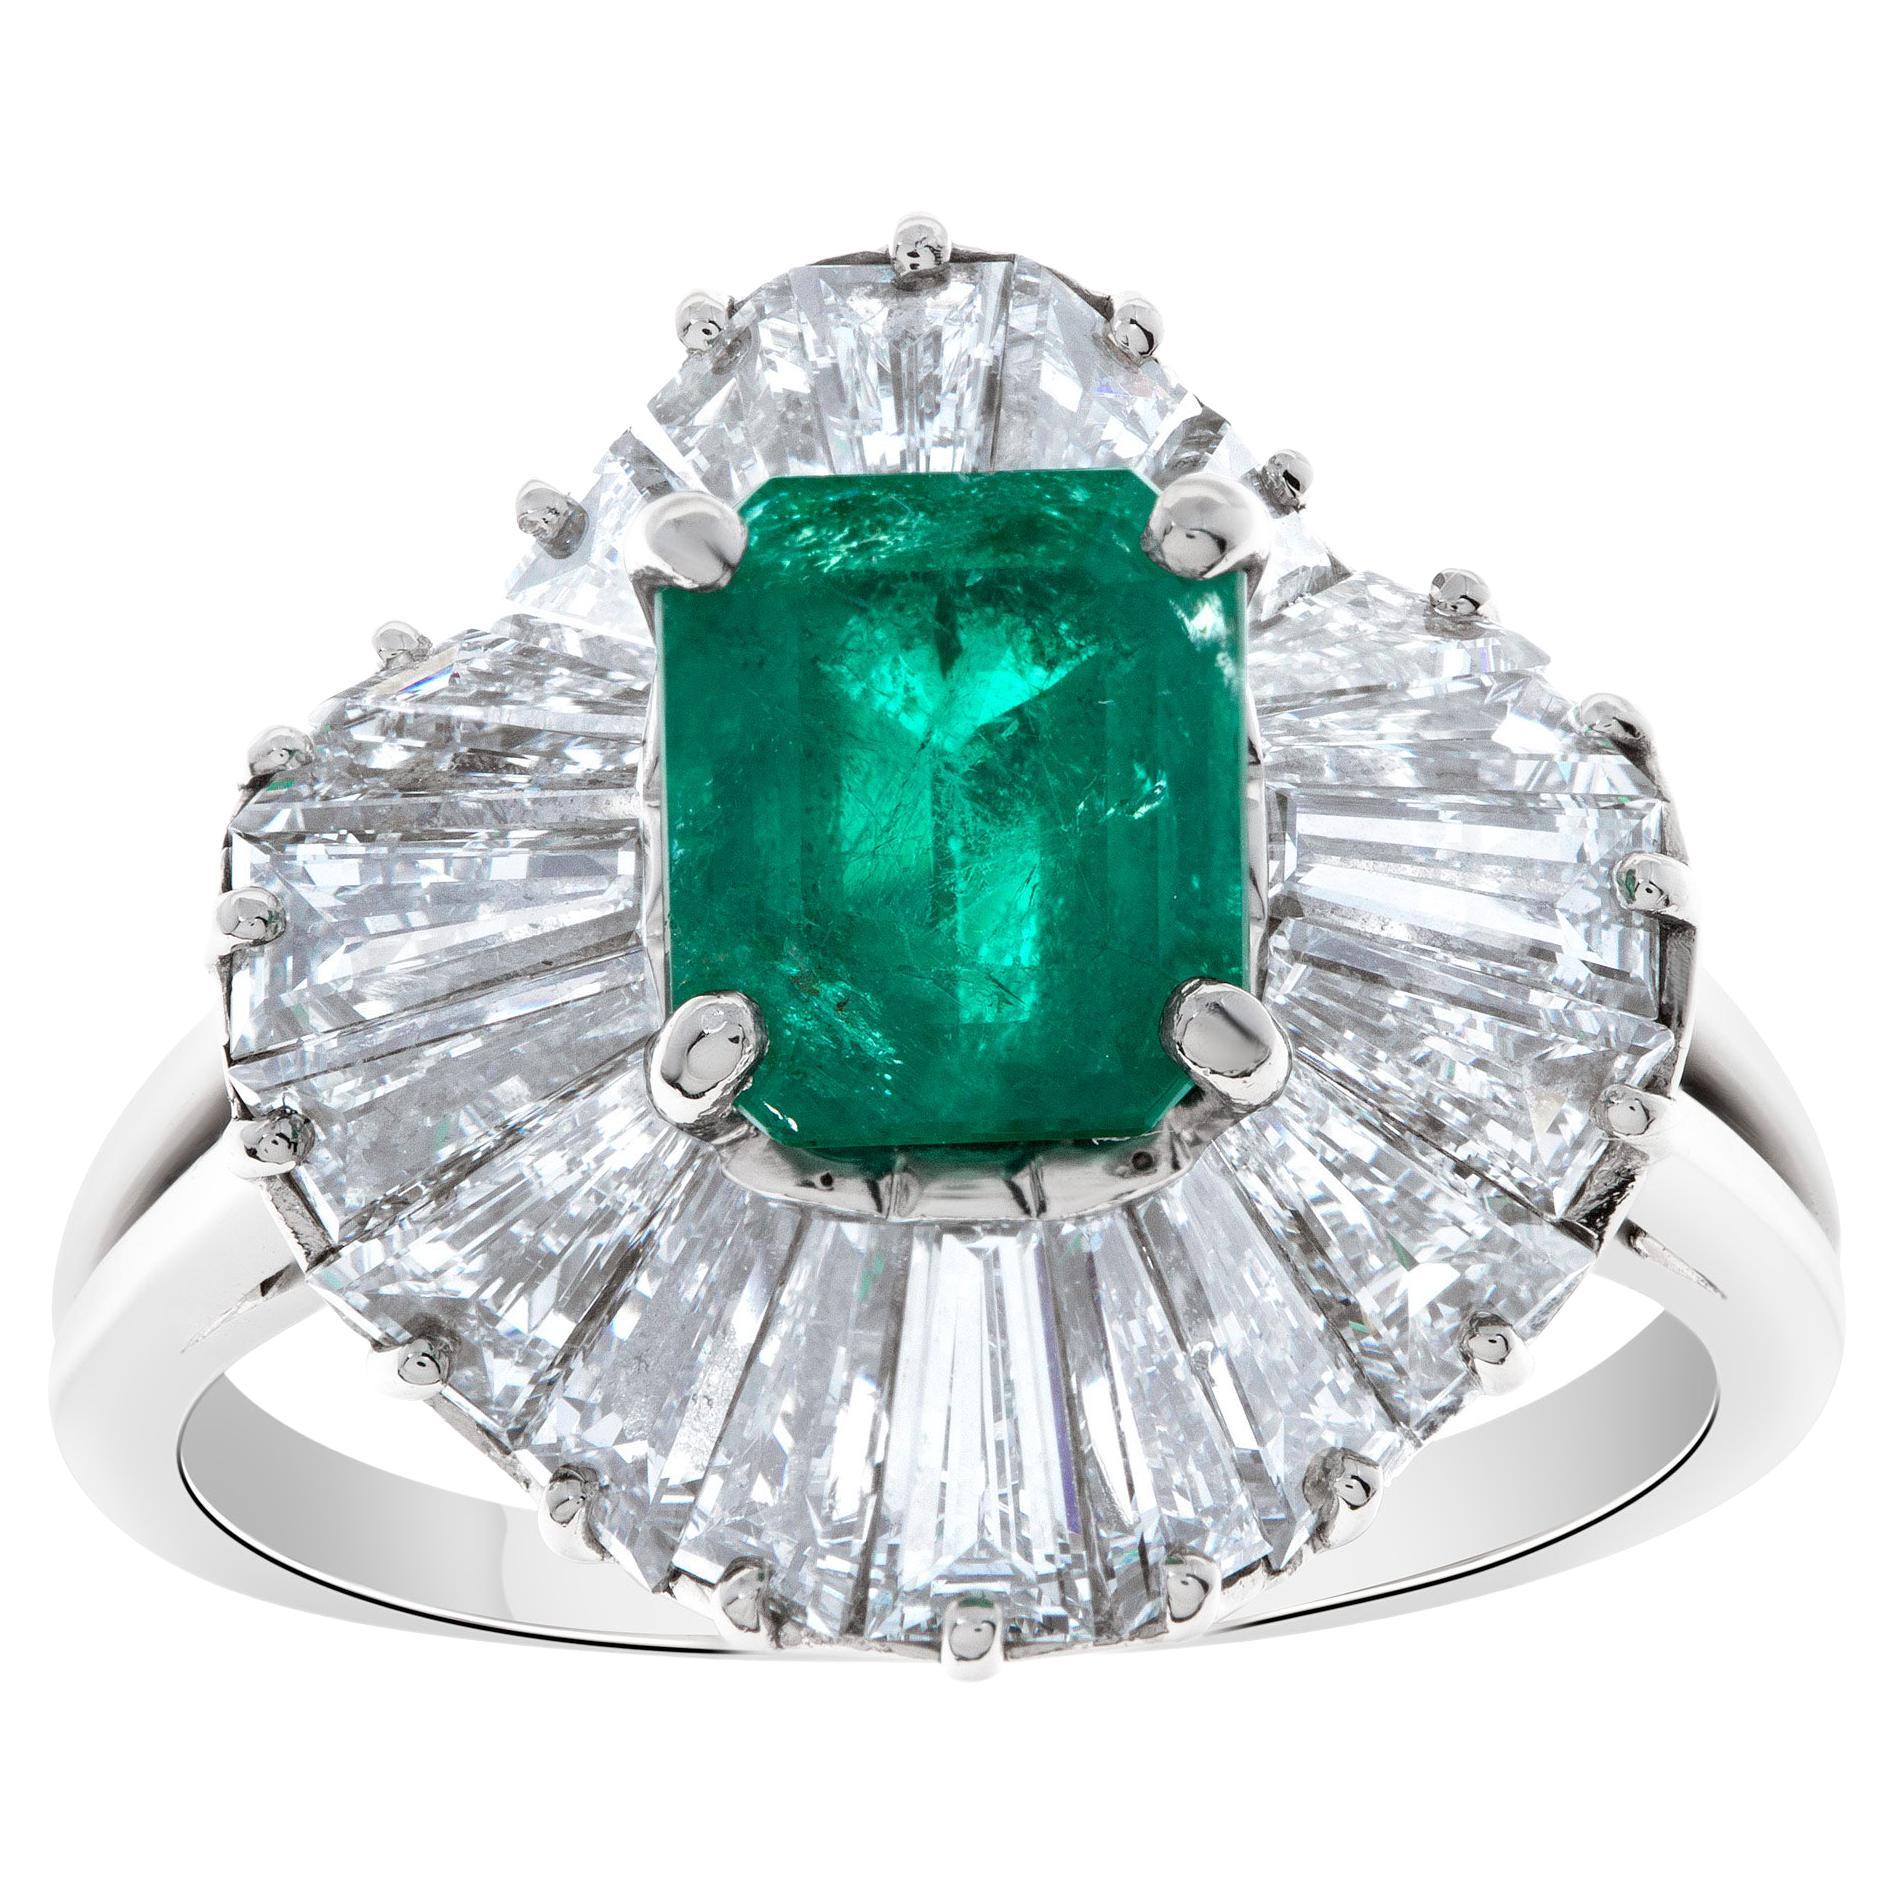 Platinum Emerald Ring with Diamond Accents